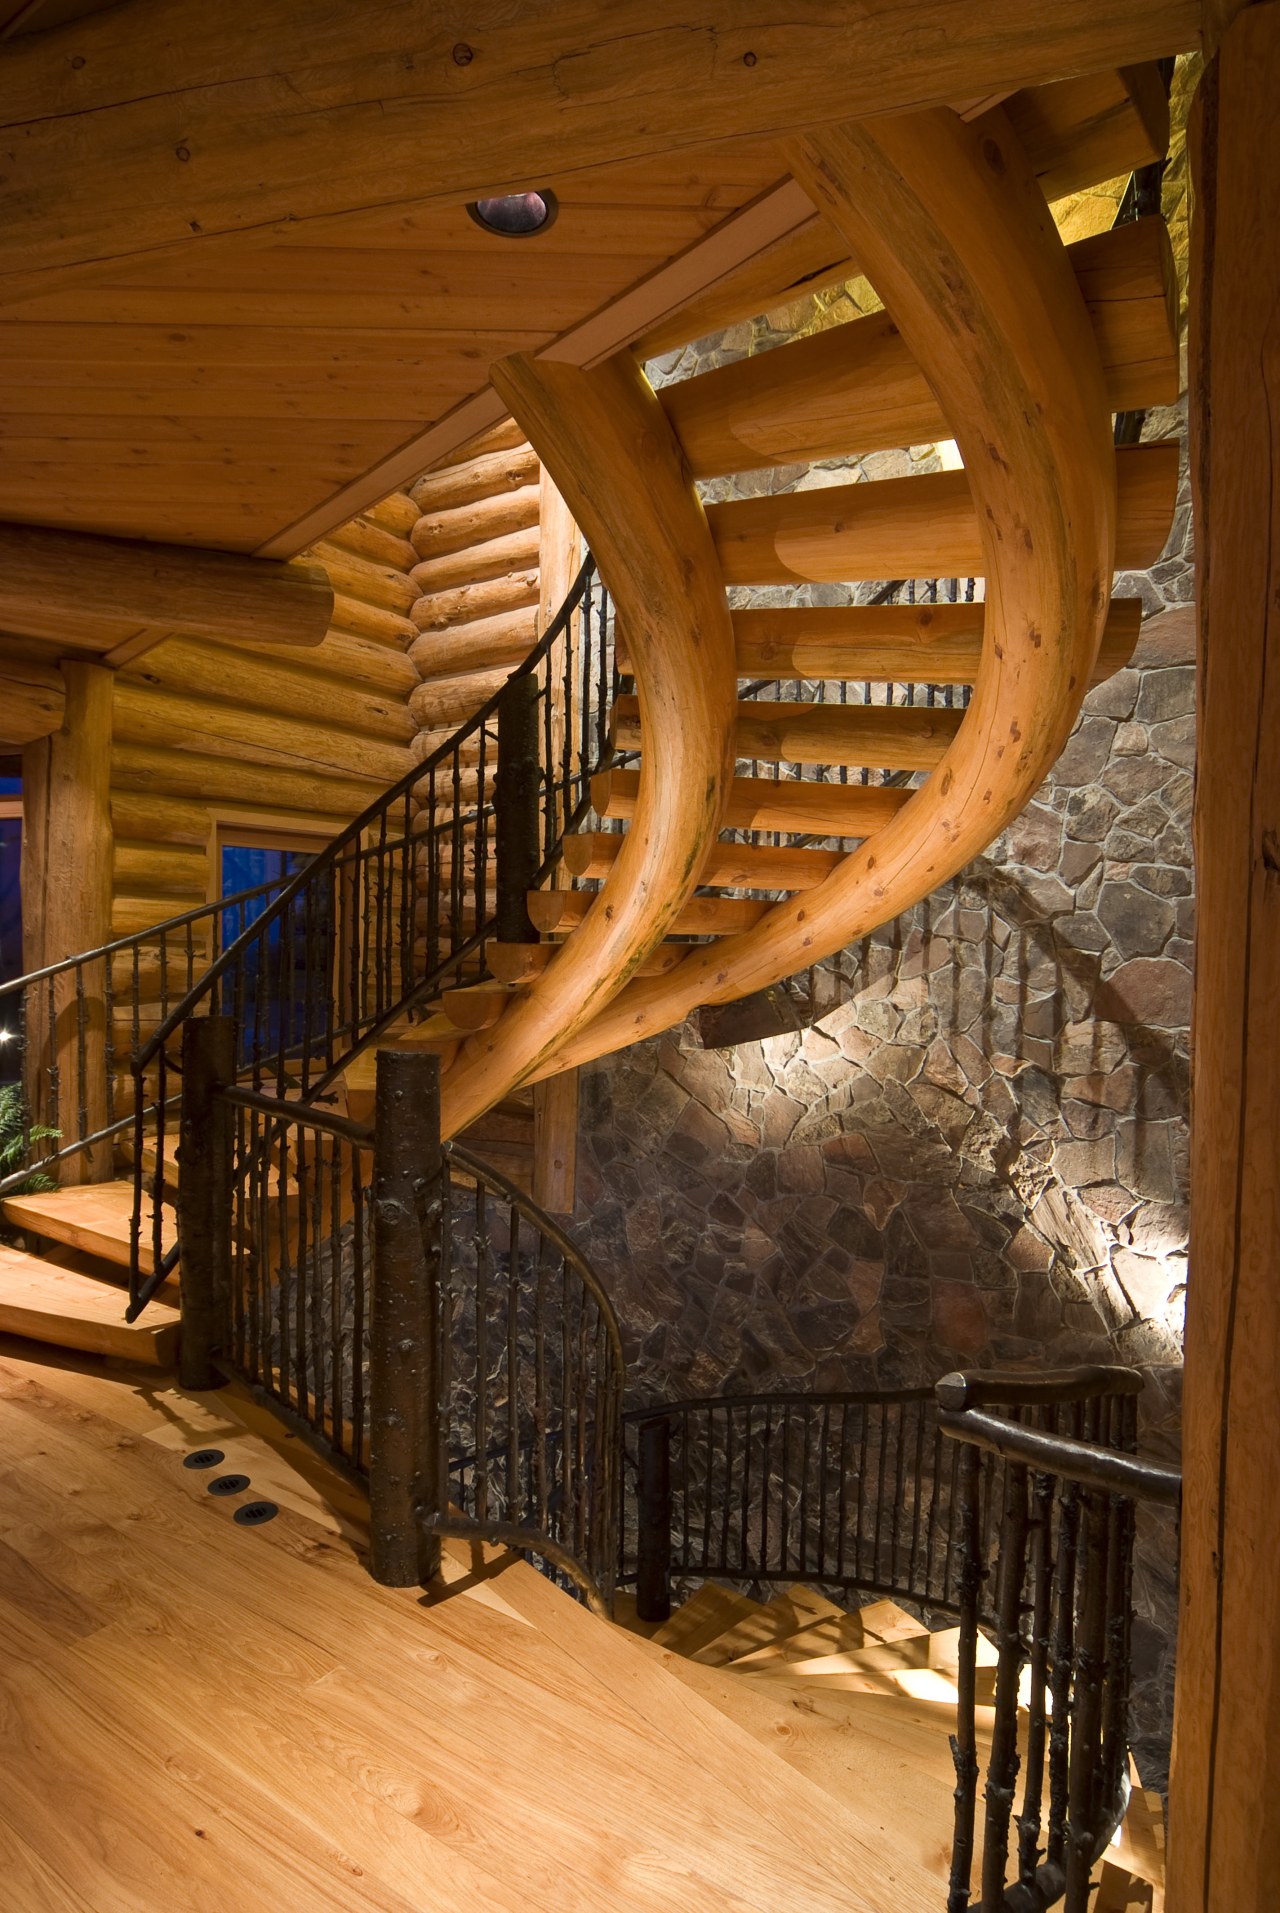 Images of a stairway featuring railing which has architecture, baluster, beam, handrail, home, interior design, lighting, log cabin, stairs, wood, brown